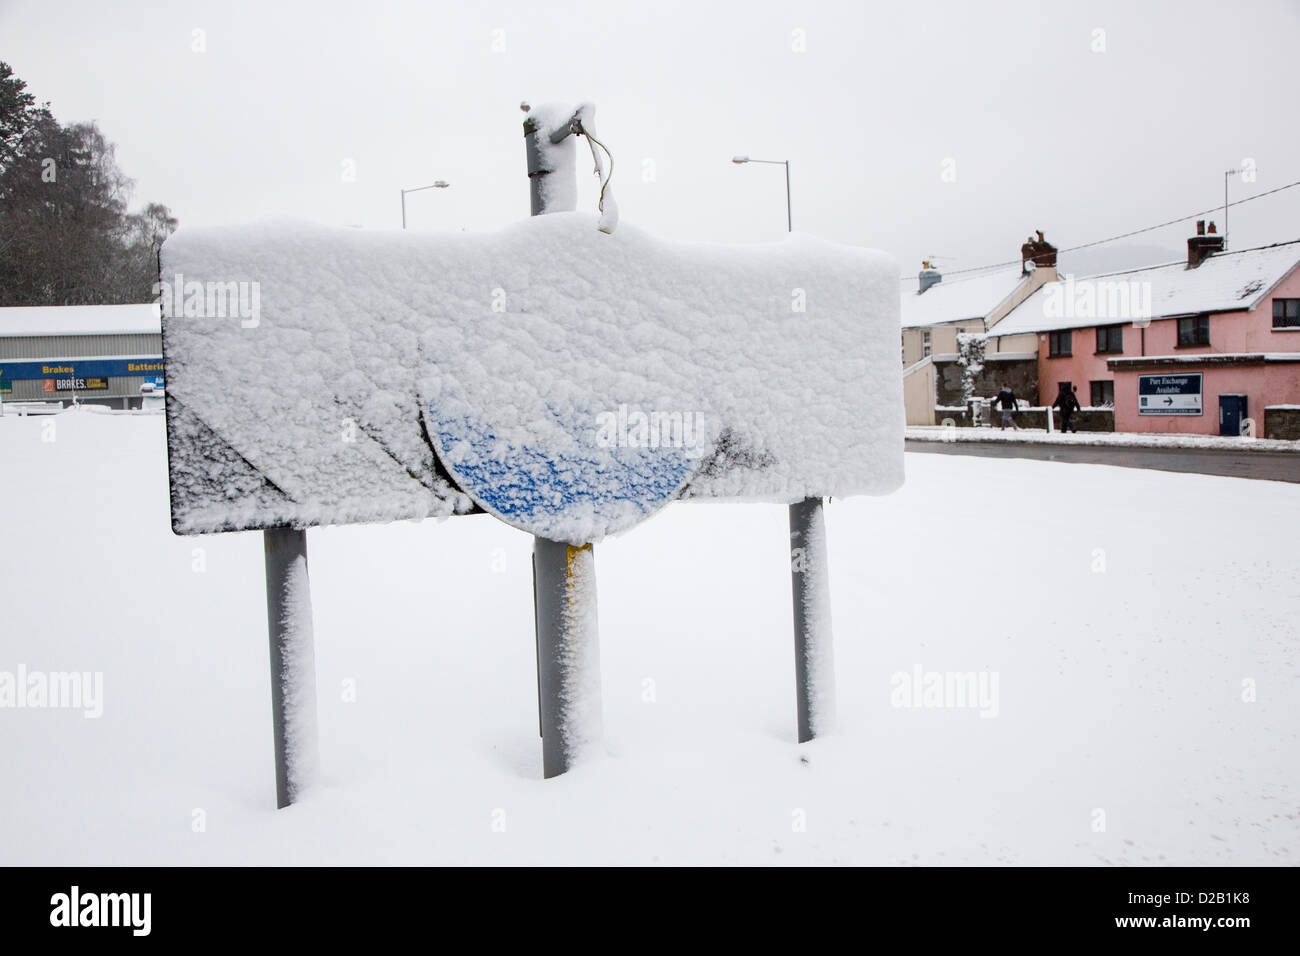 Keep left road sign on roundabout covered in snow, Abergavenny, Wales, UK Stock Photo